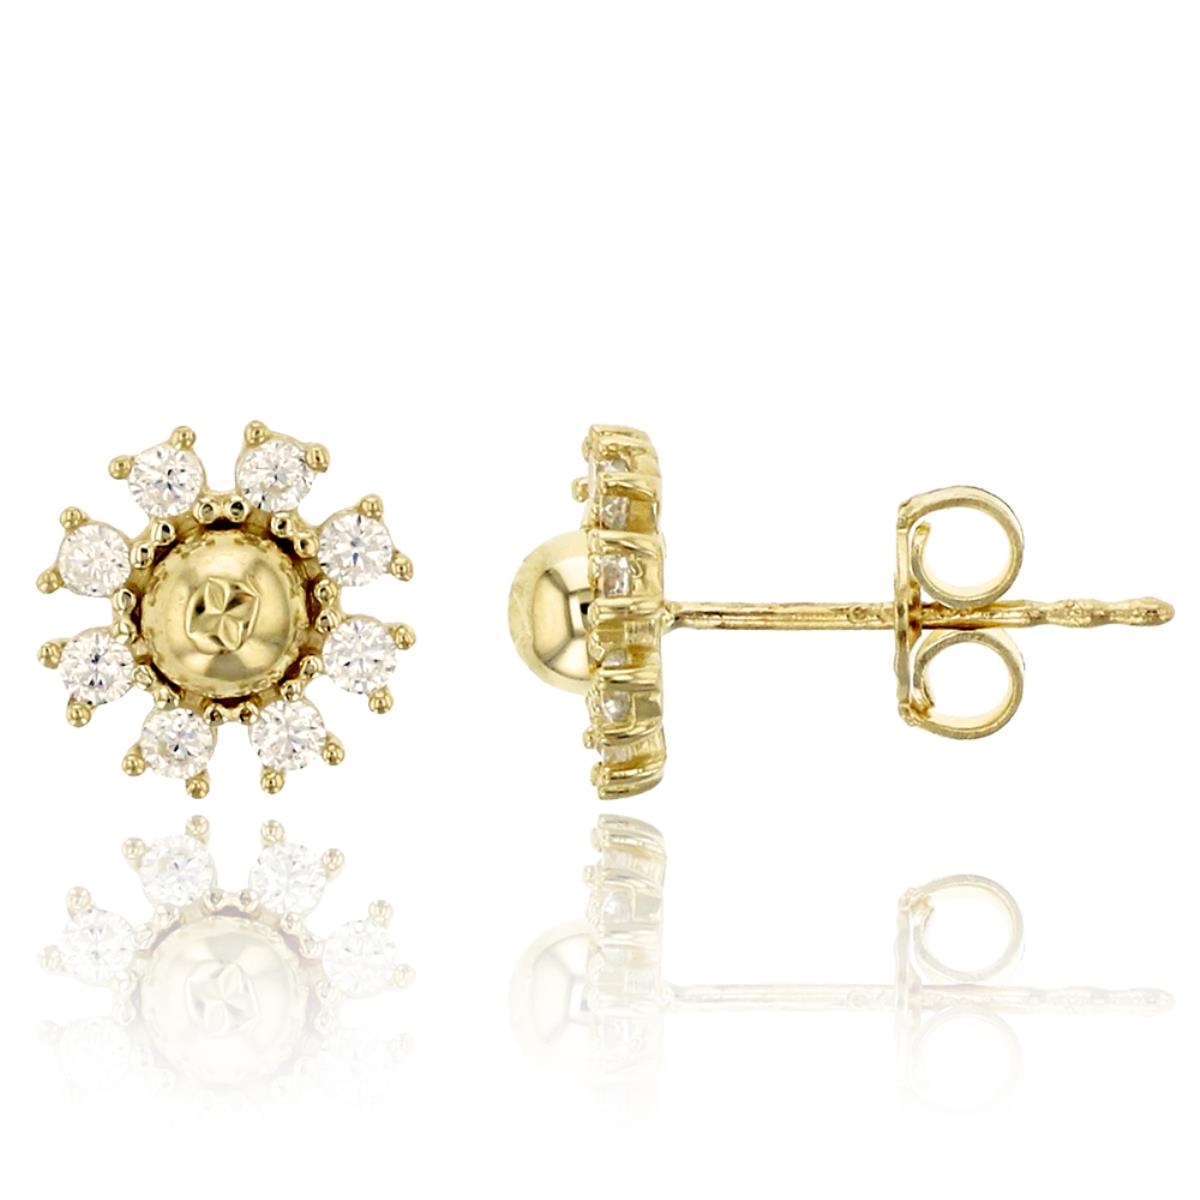 14K Yellow Gold Star DC Micropave Flower Stud Earring